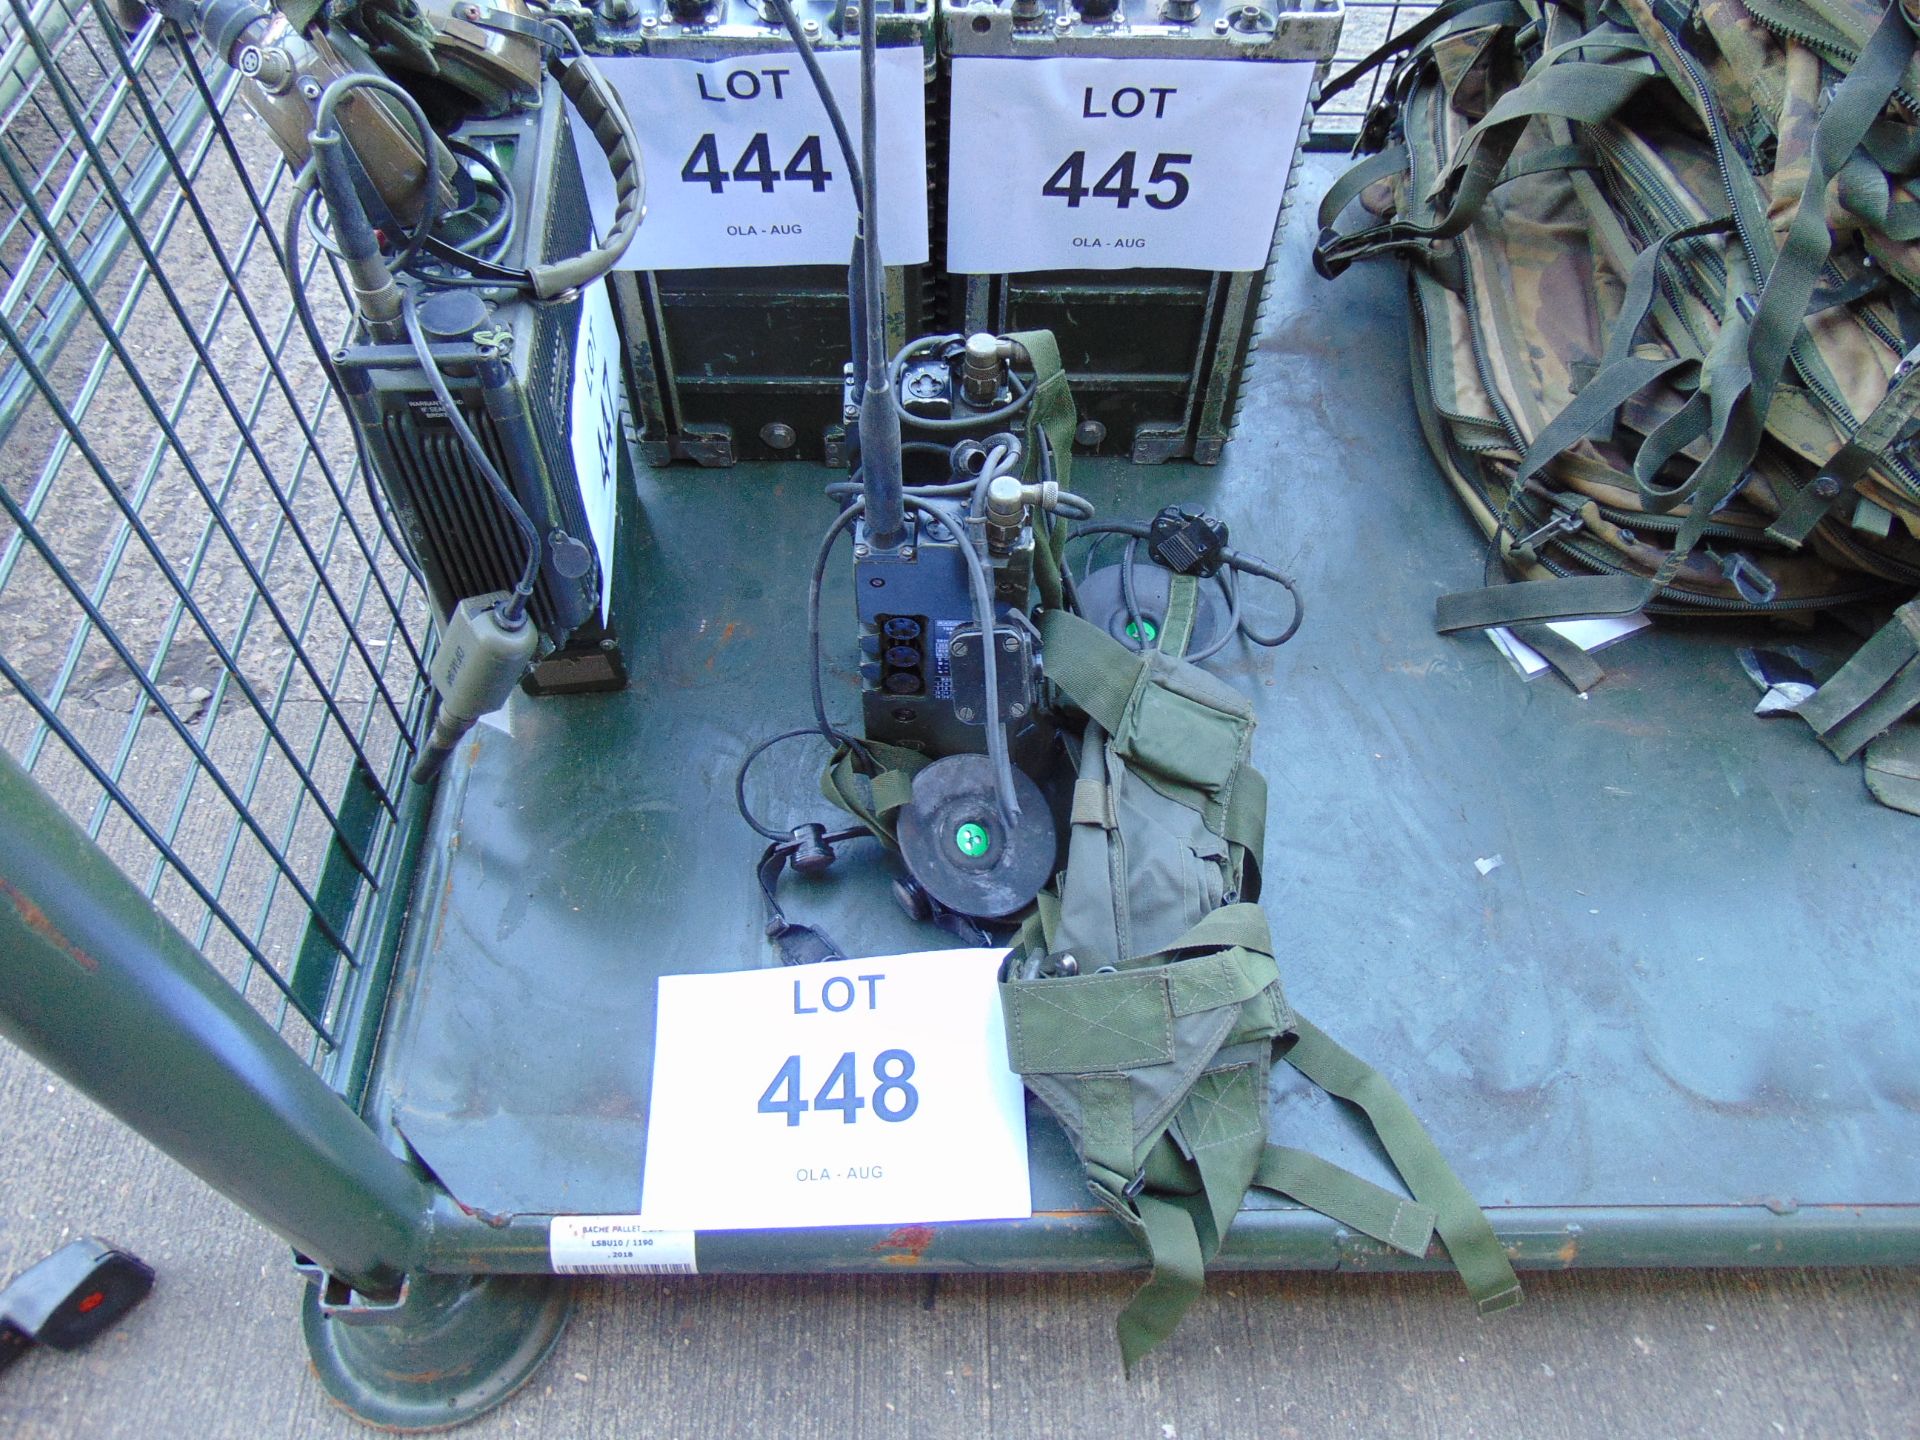 2 x RT 349 Transmitter Receivers c/w pouches, battery, antenna, etc - Image 2 of 3